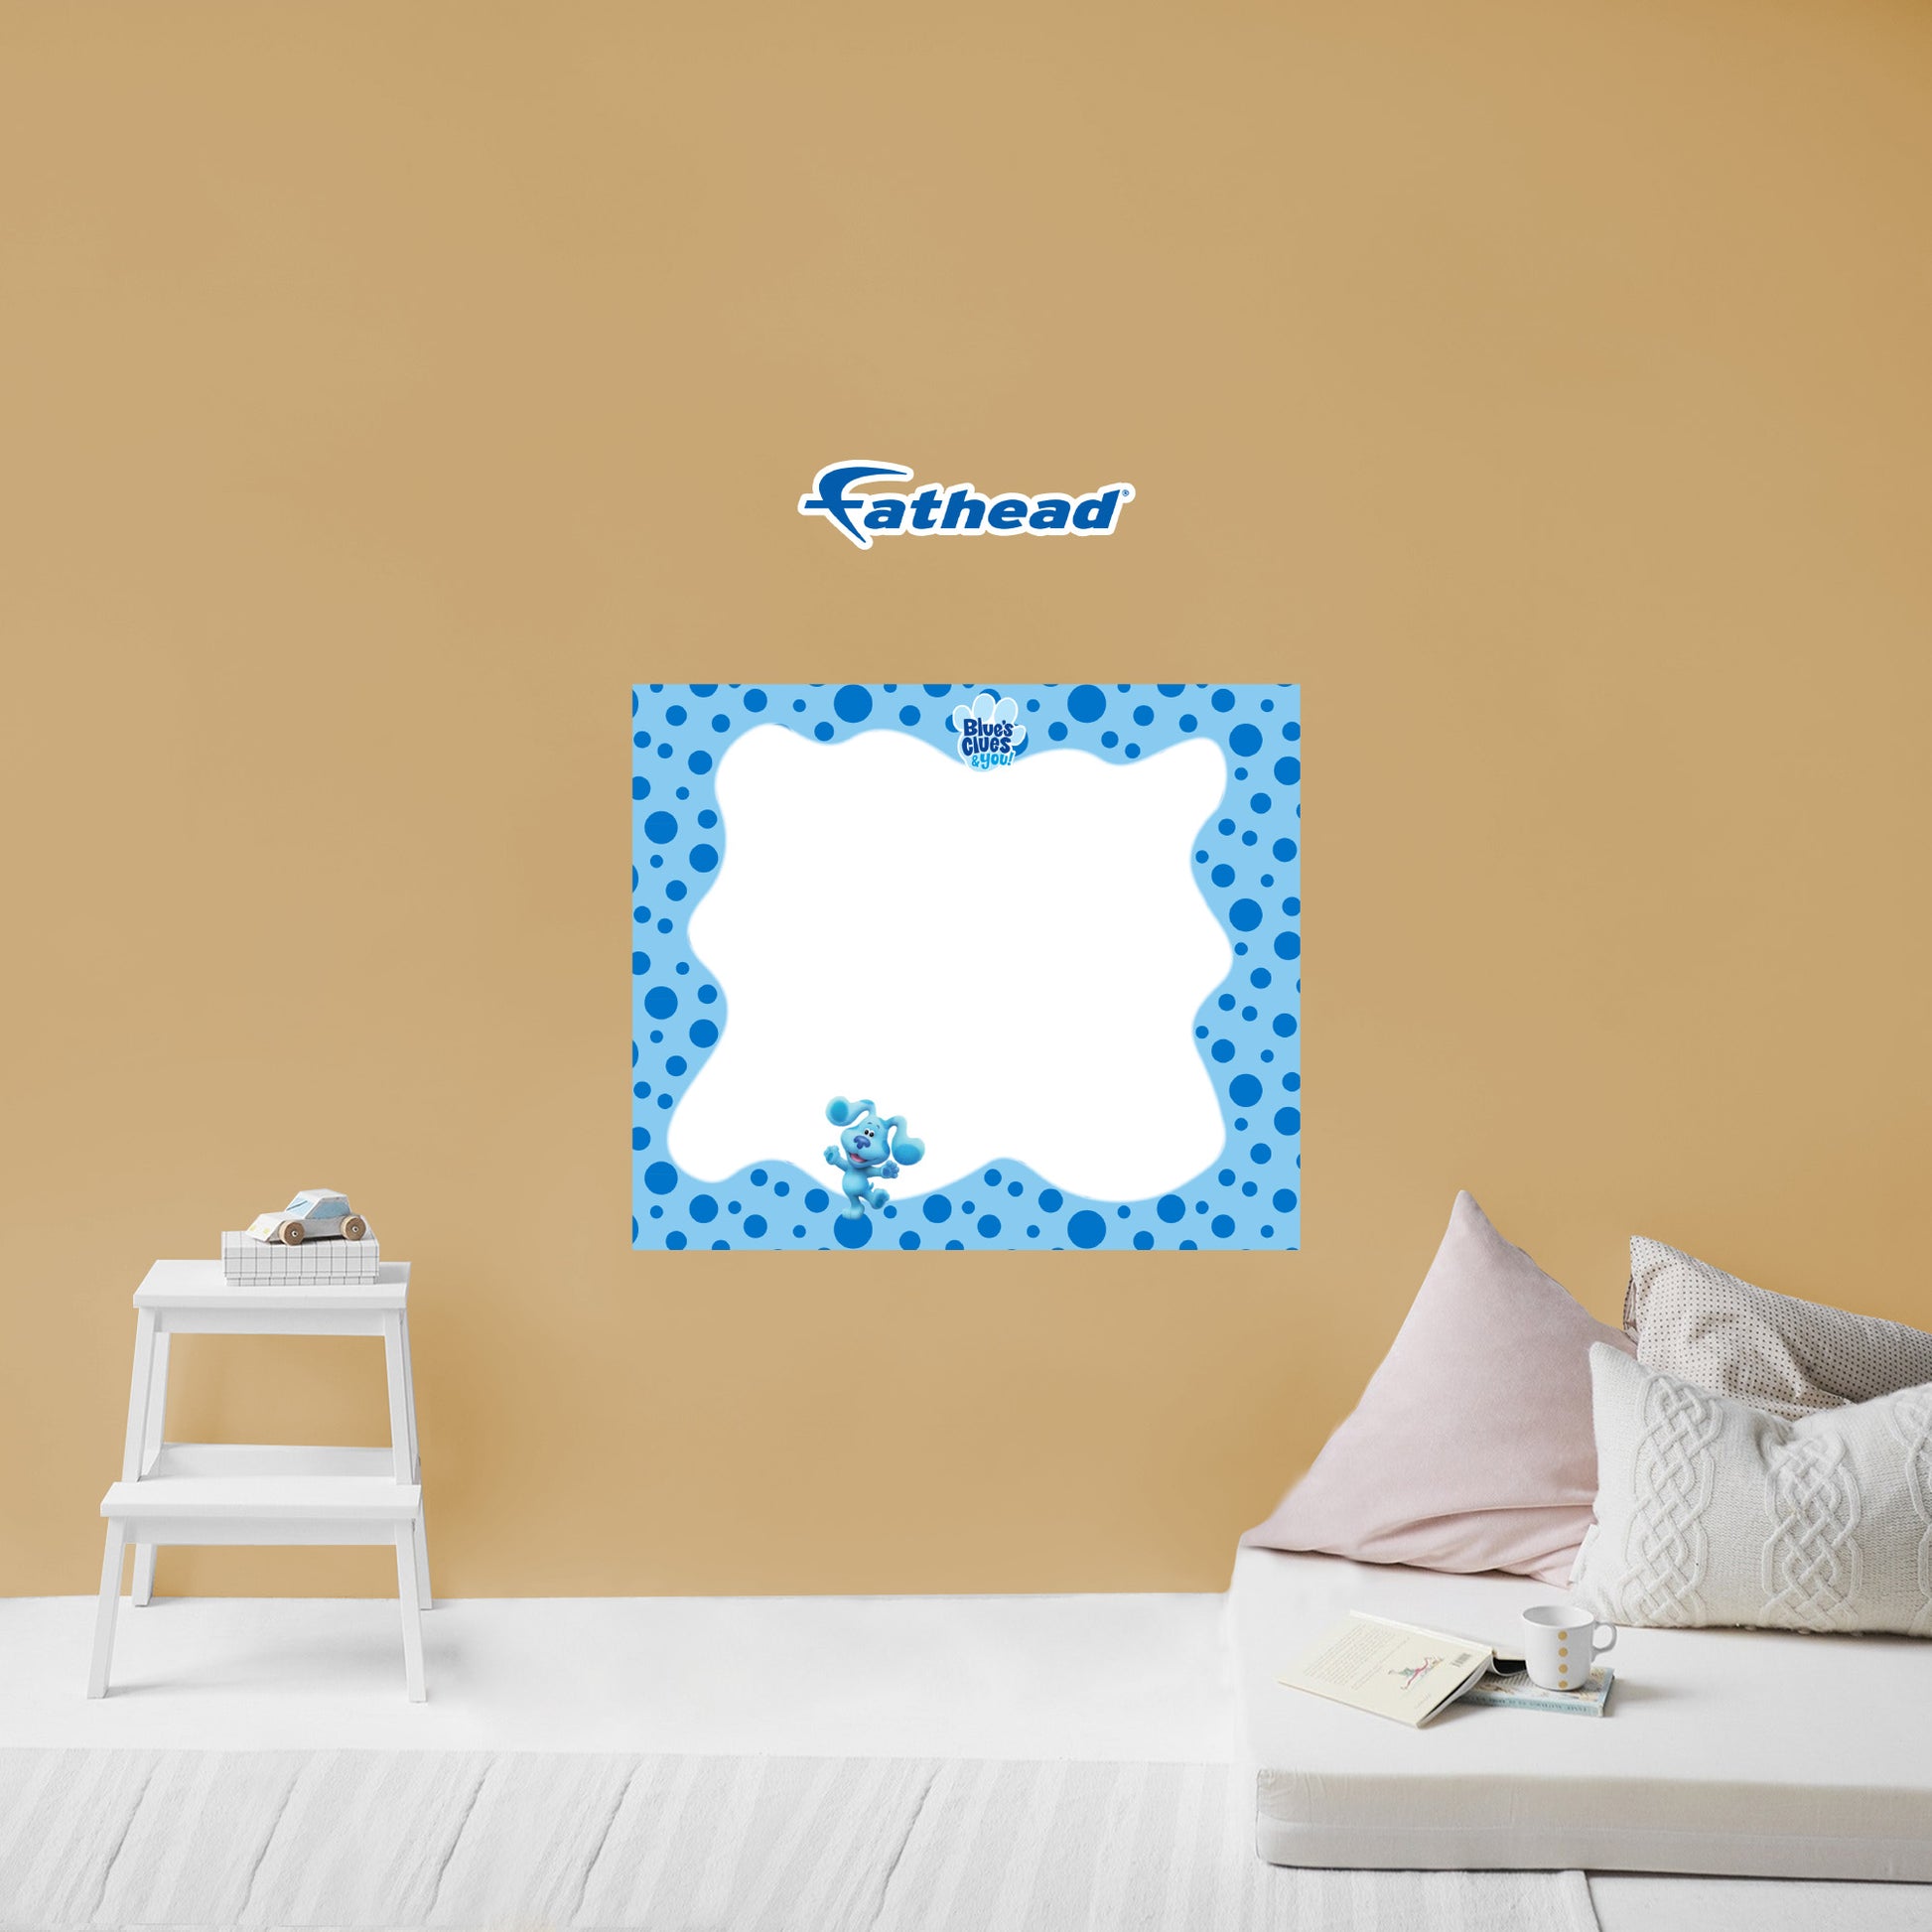 Fathead Dry Erase Thought Bubbles - Large Removable Wall Decals